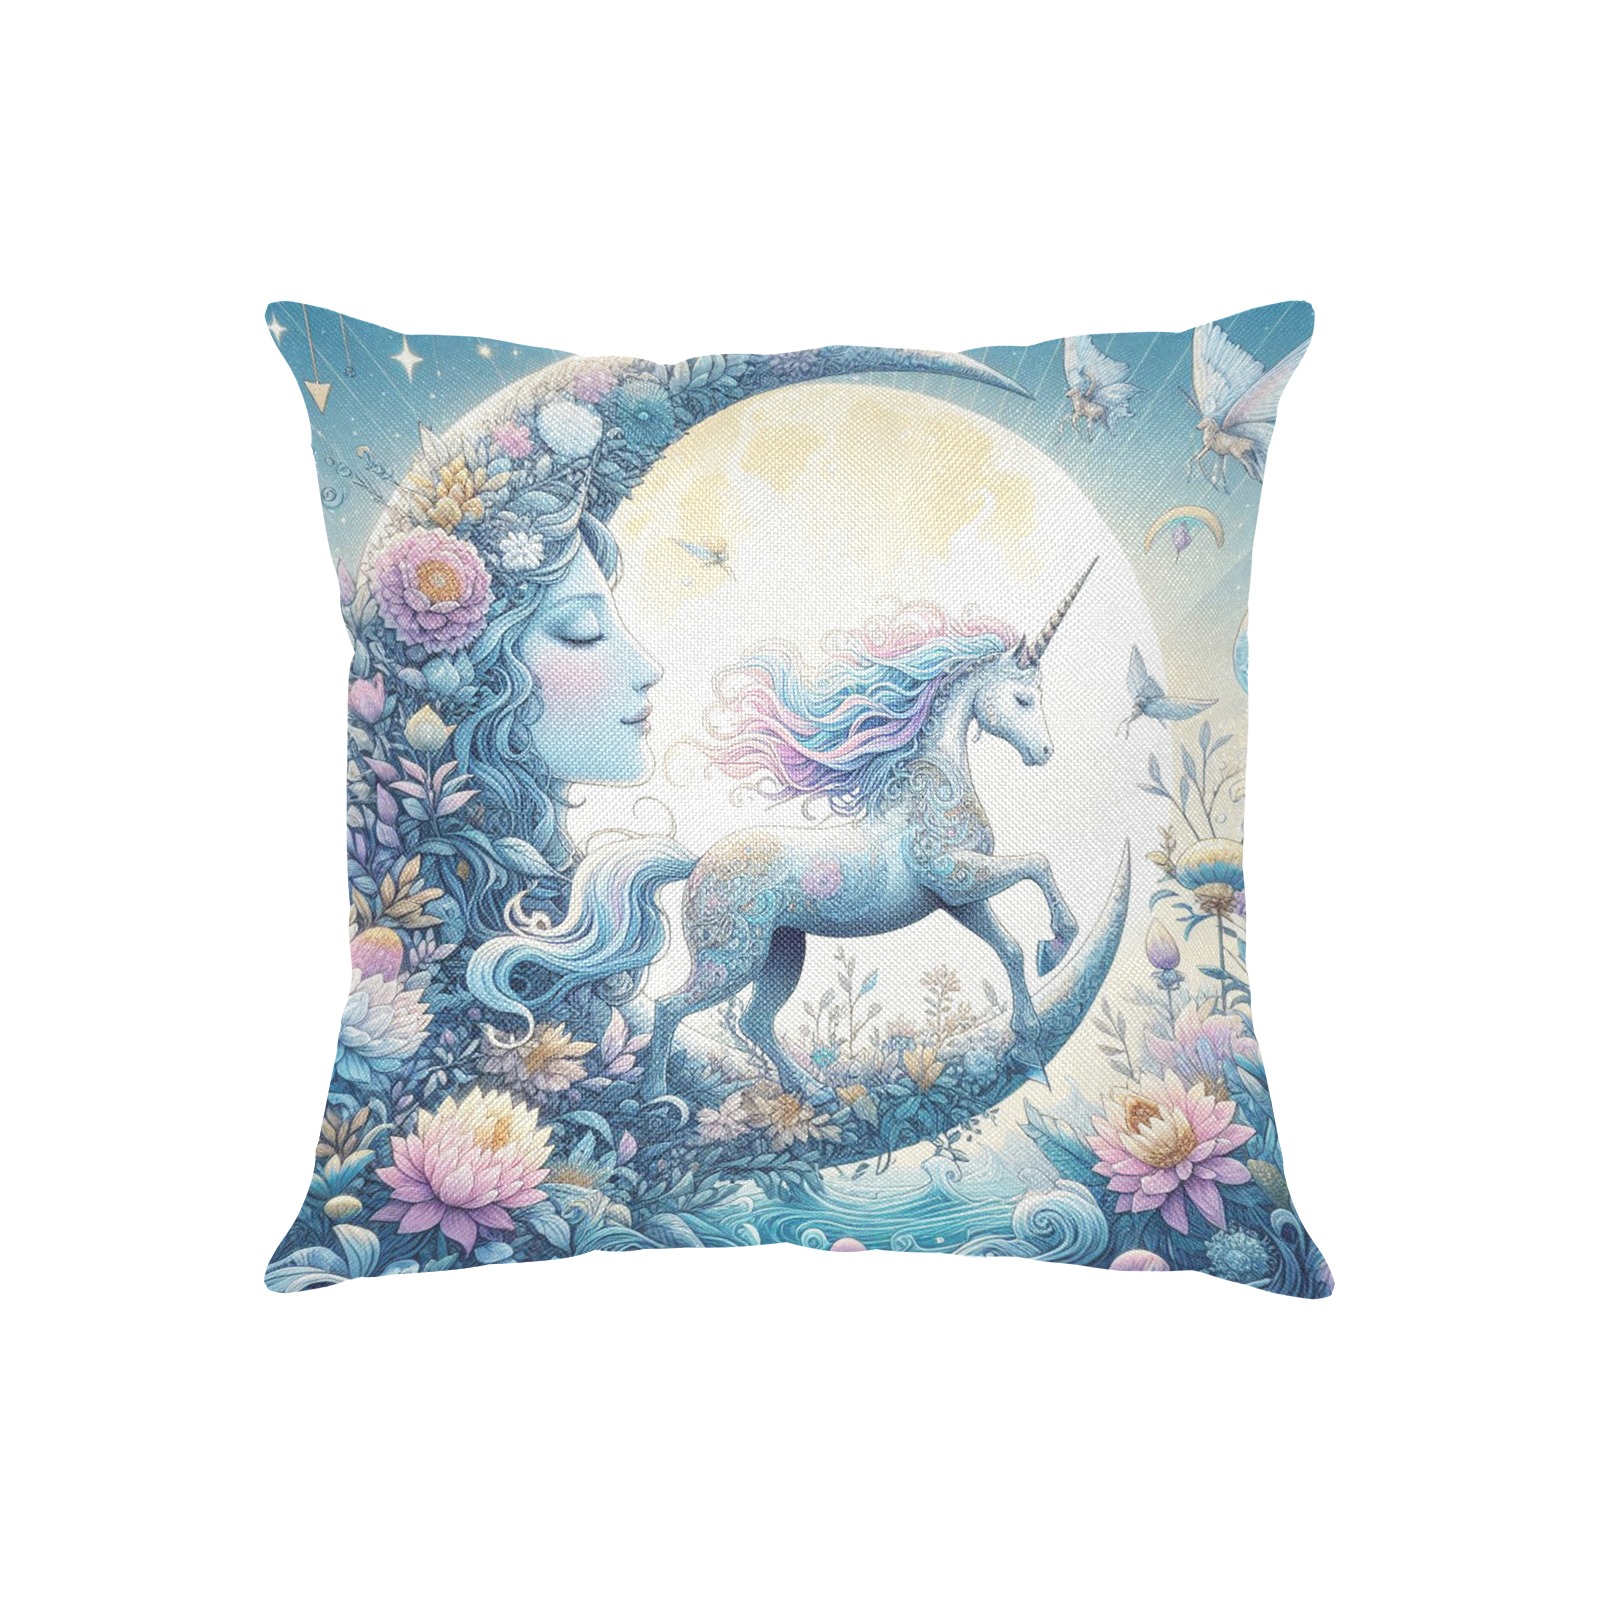 Unicorn And The Moon Linen Zippered Pillowcase 18"x18"(Two Sides)